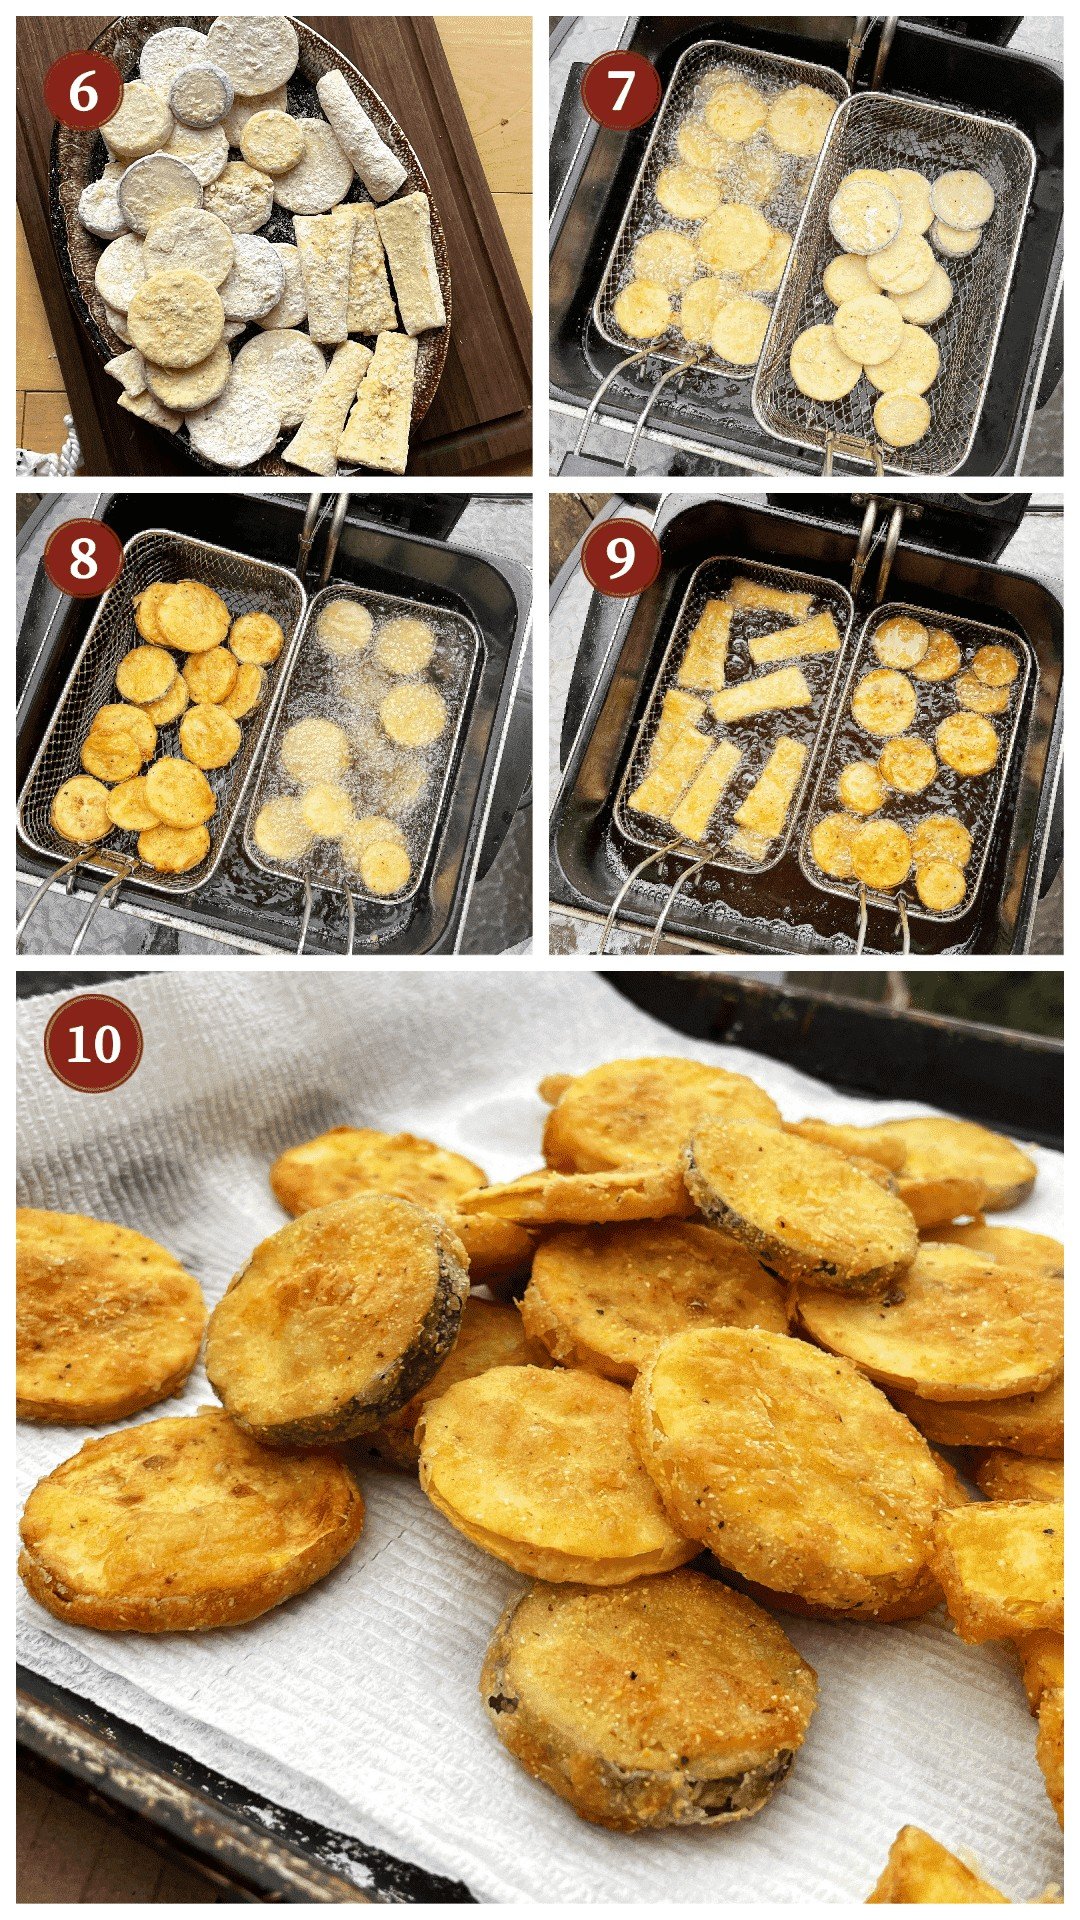 A collage of images showing how to fry summer squash, steps 6 - 10.